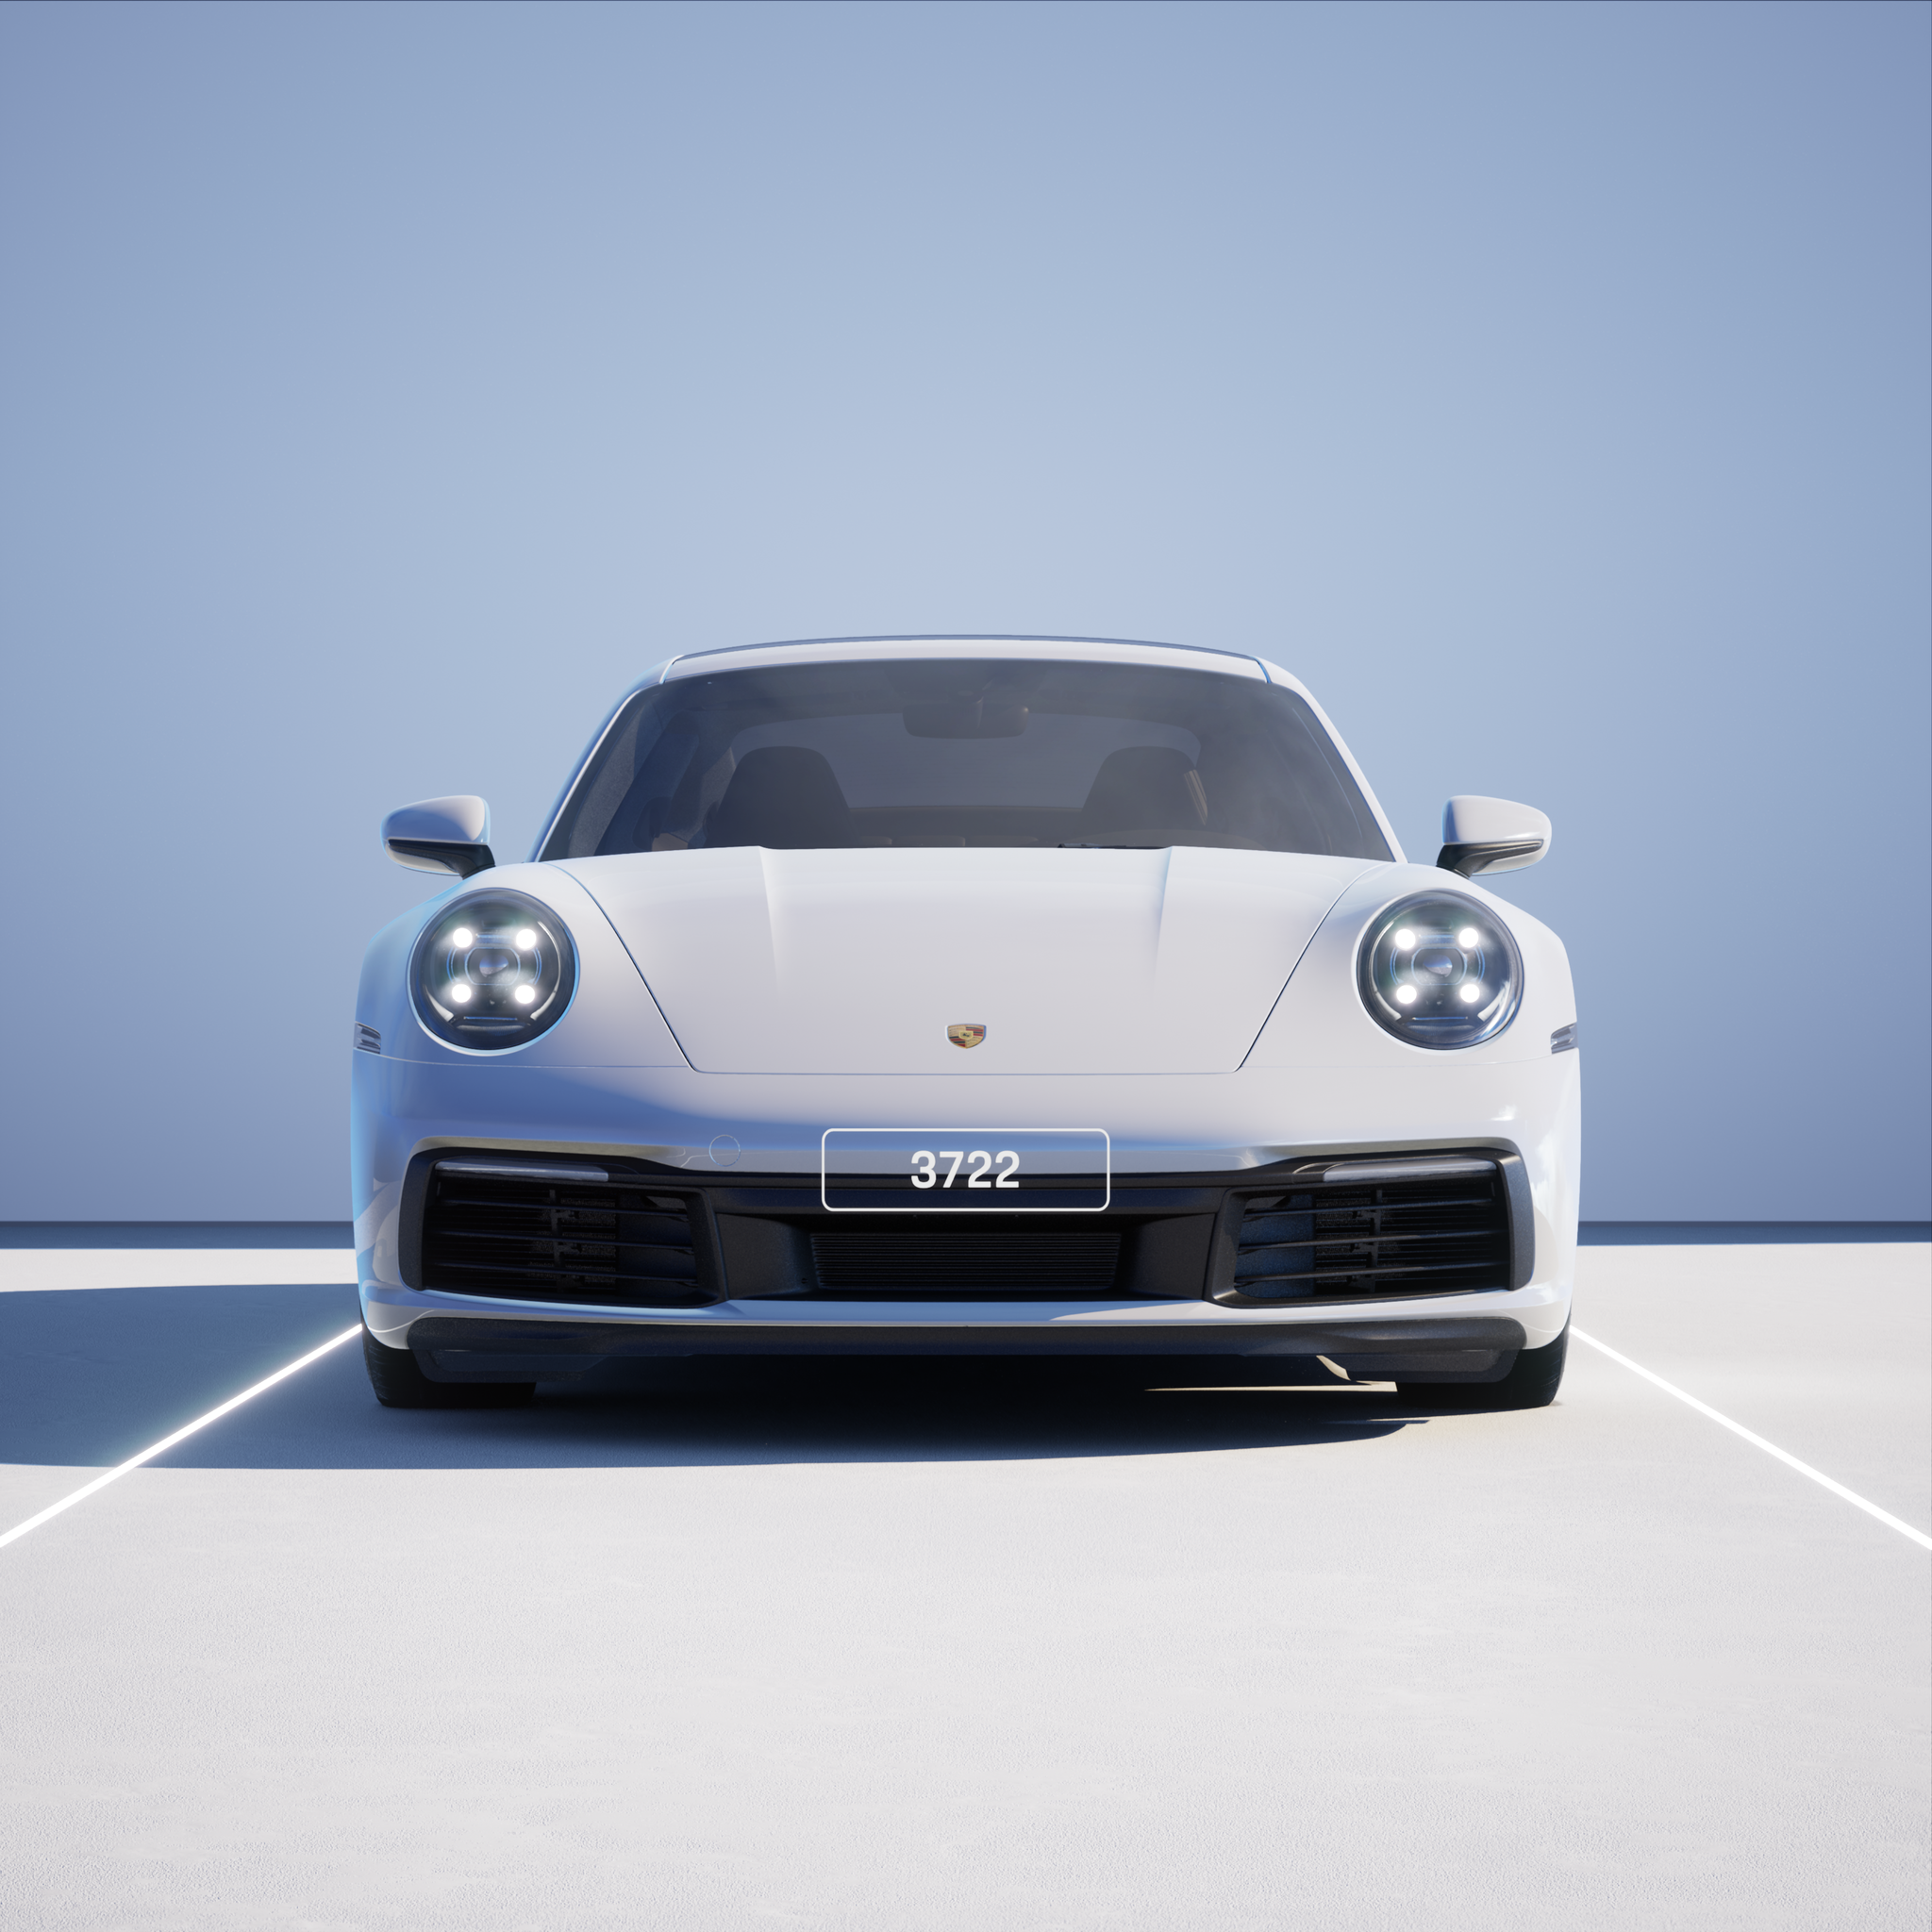 The PORSCHΞ 911 3722 image in phase